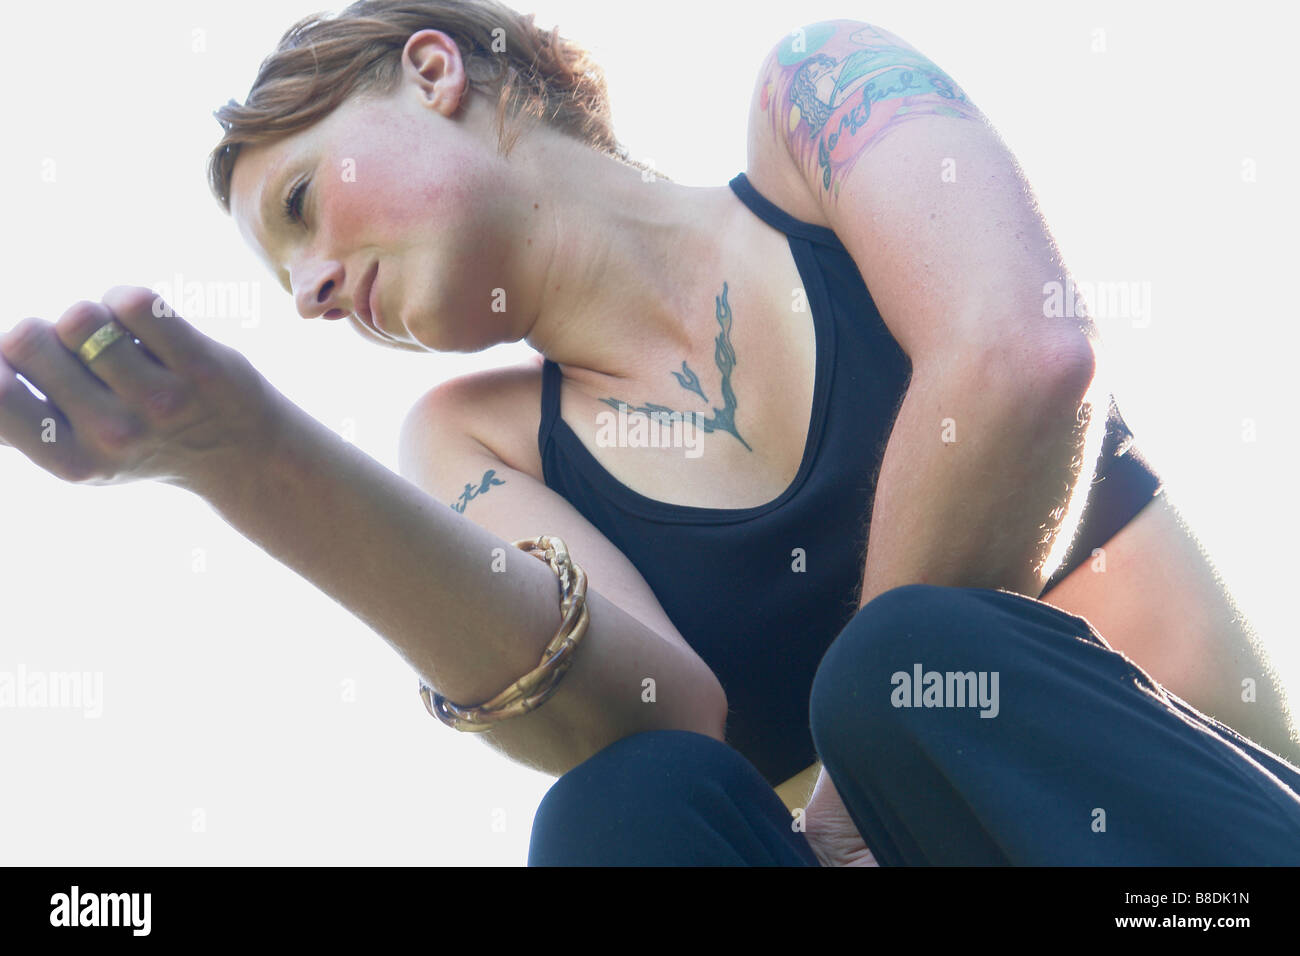 Low angle portrait of woman with tattoos Stock Photo